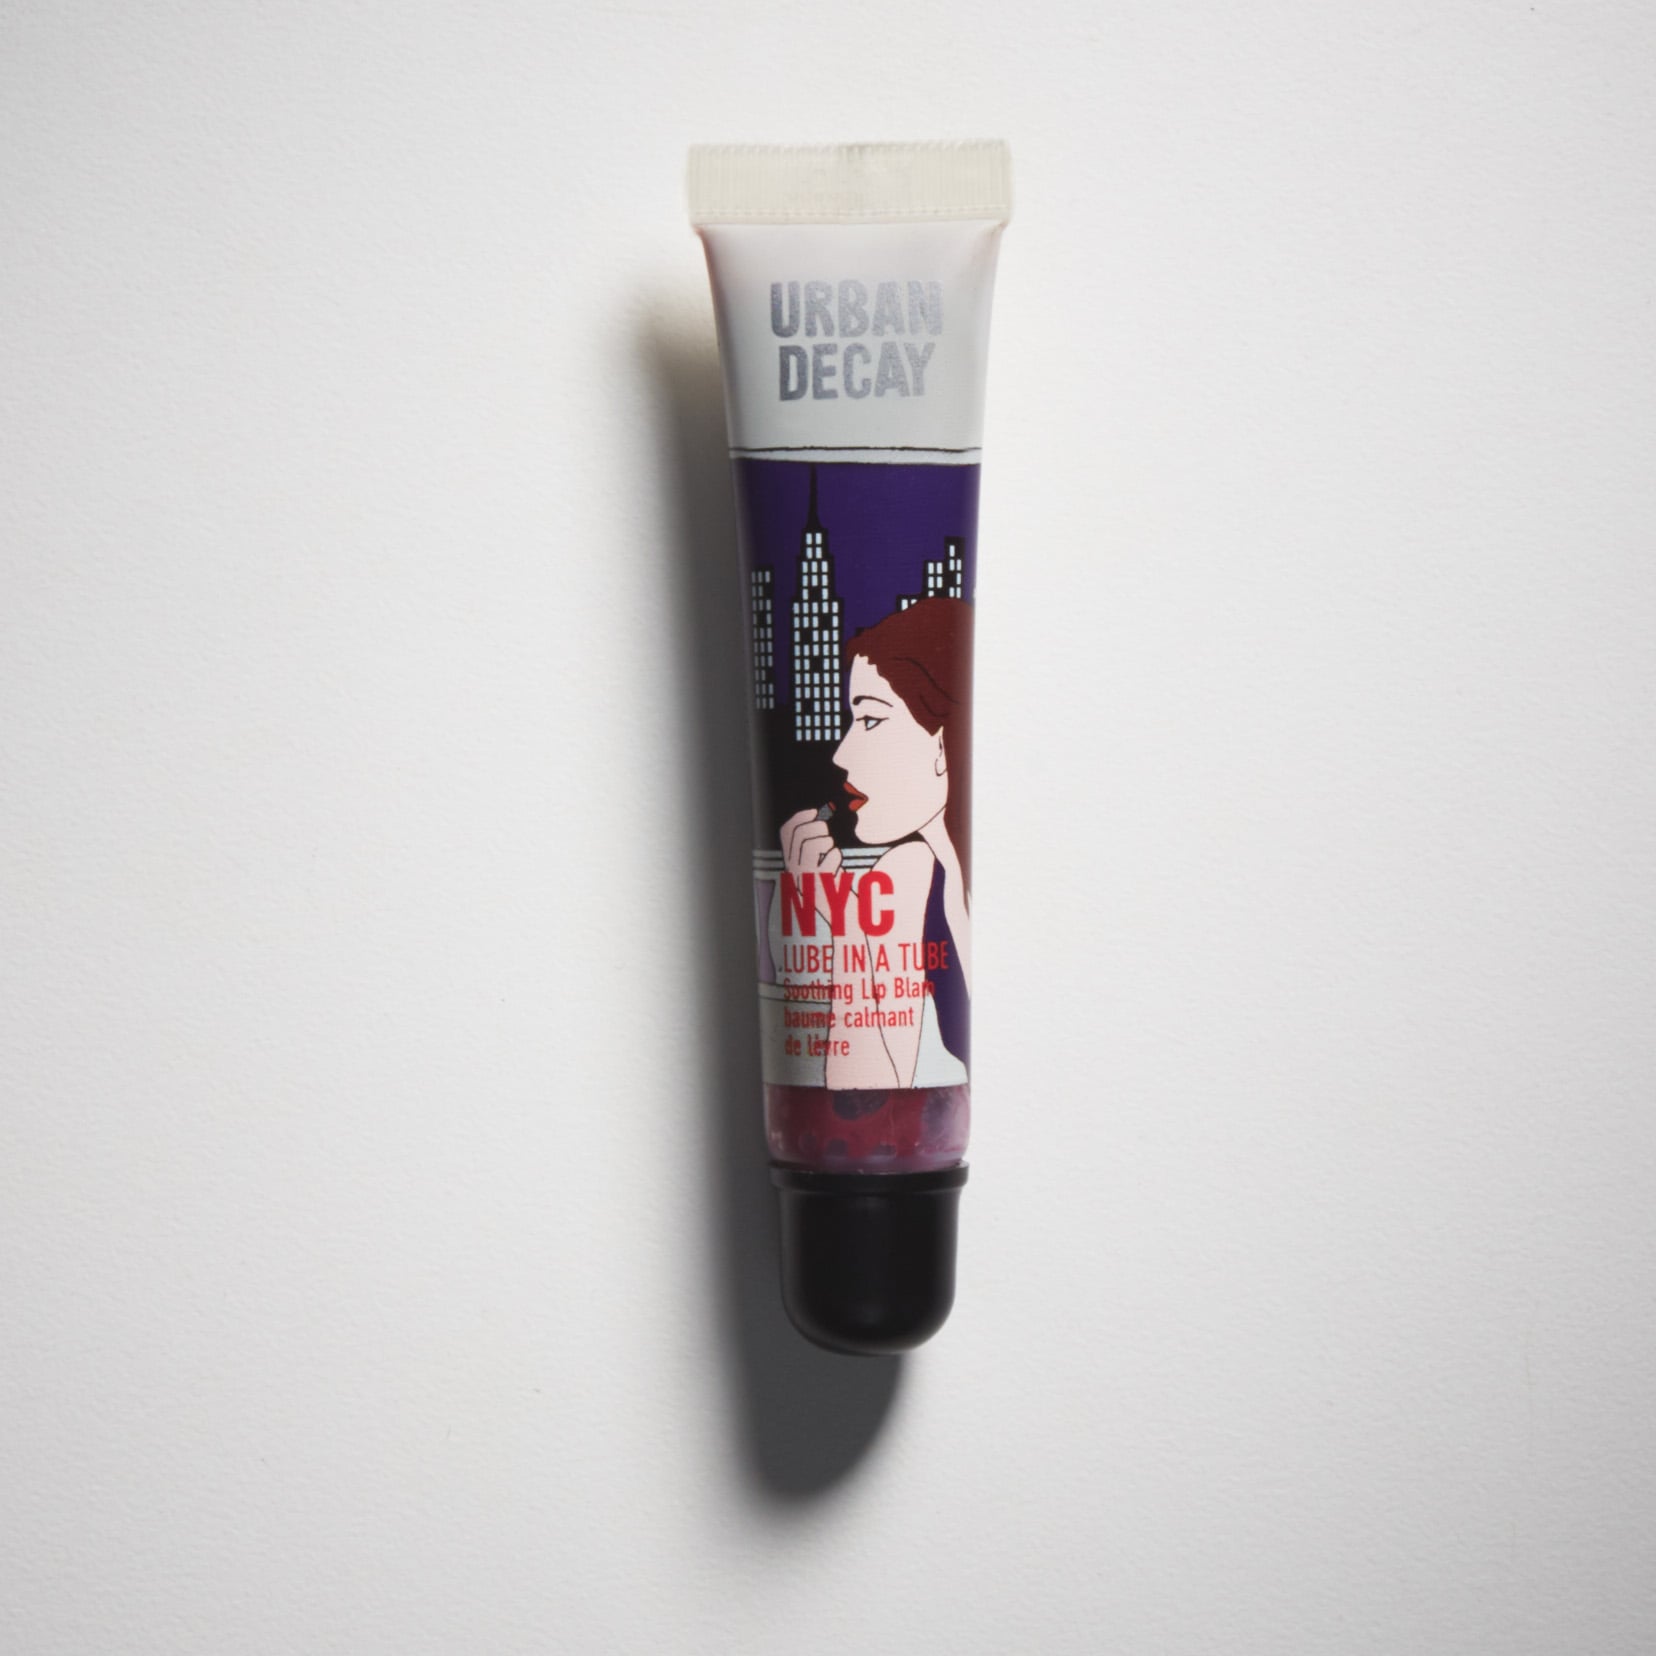 Barcelona Voorschrift Classificeren Urban Decay Lube in a Tube Soothing Lip Balm in NYC | 14 Discontinued Urban  Decay Products We Want the Brand to Bring Back | POPSUGAR Beauty Photo 9